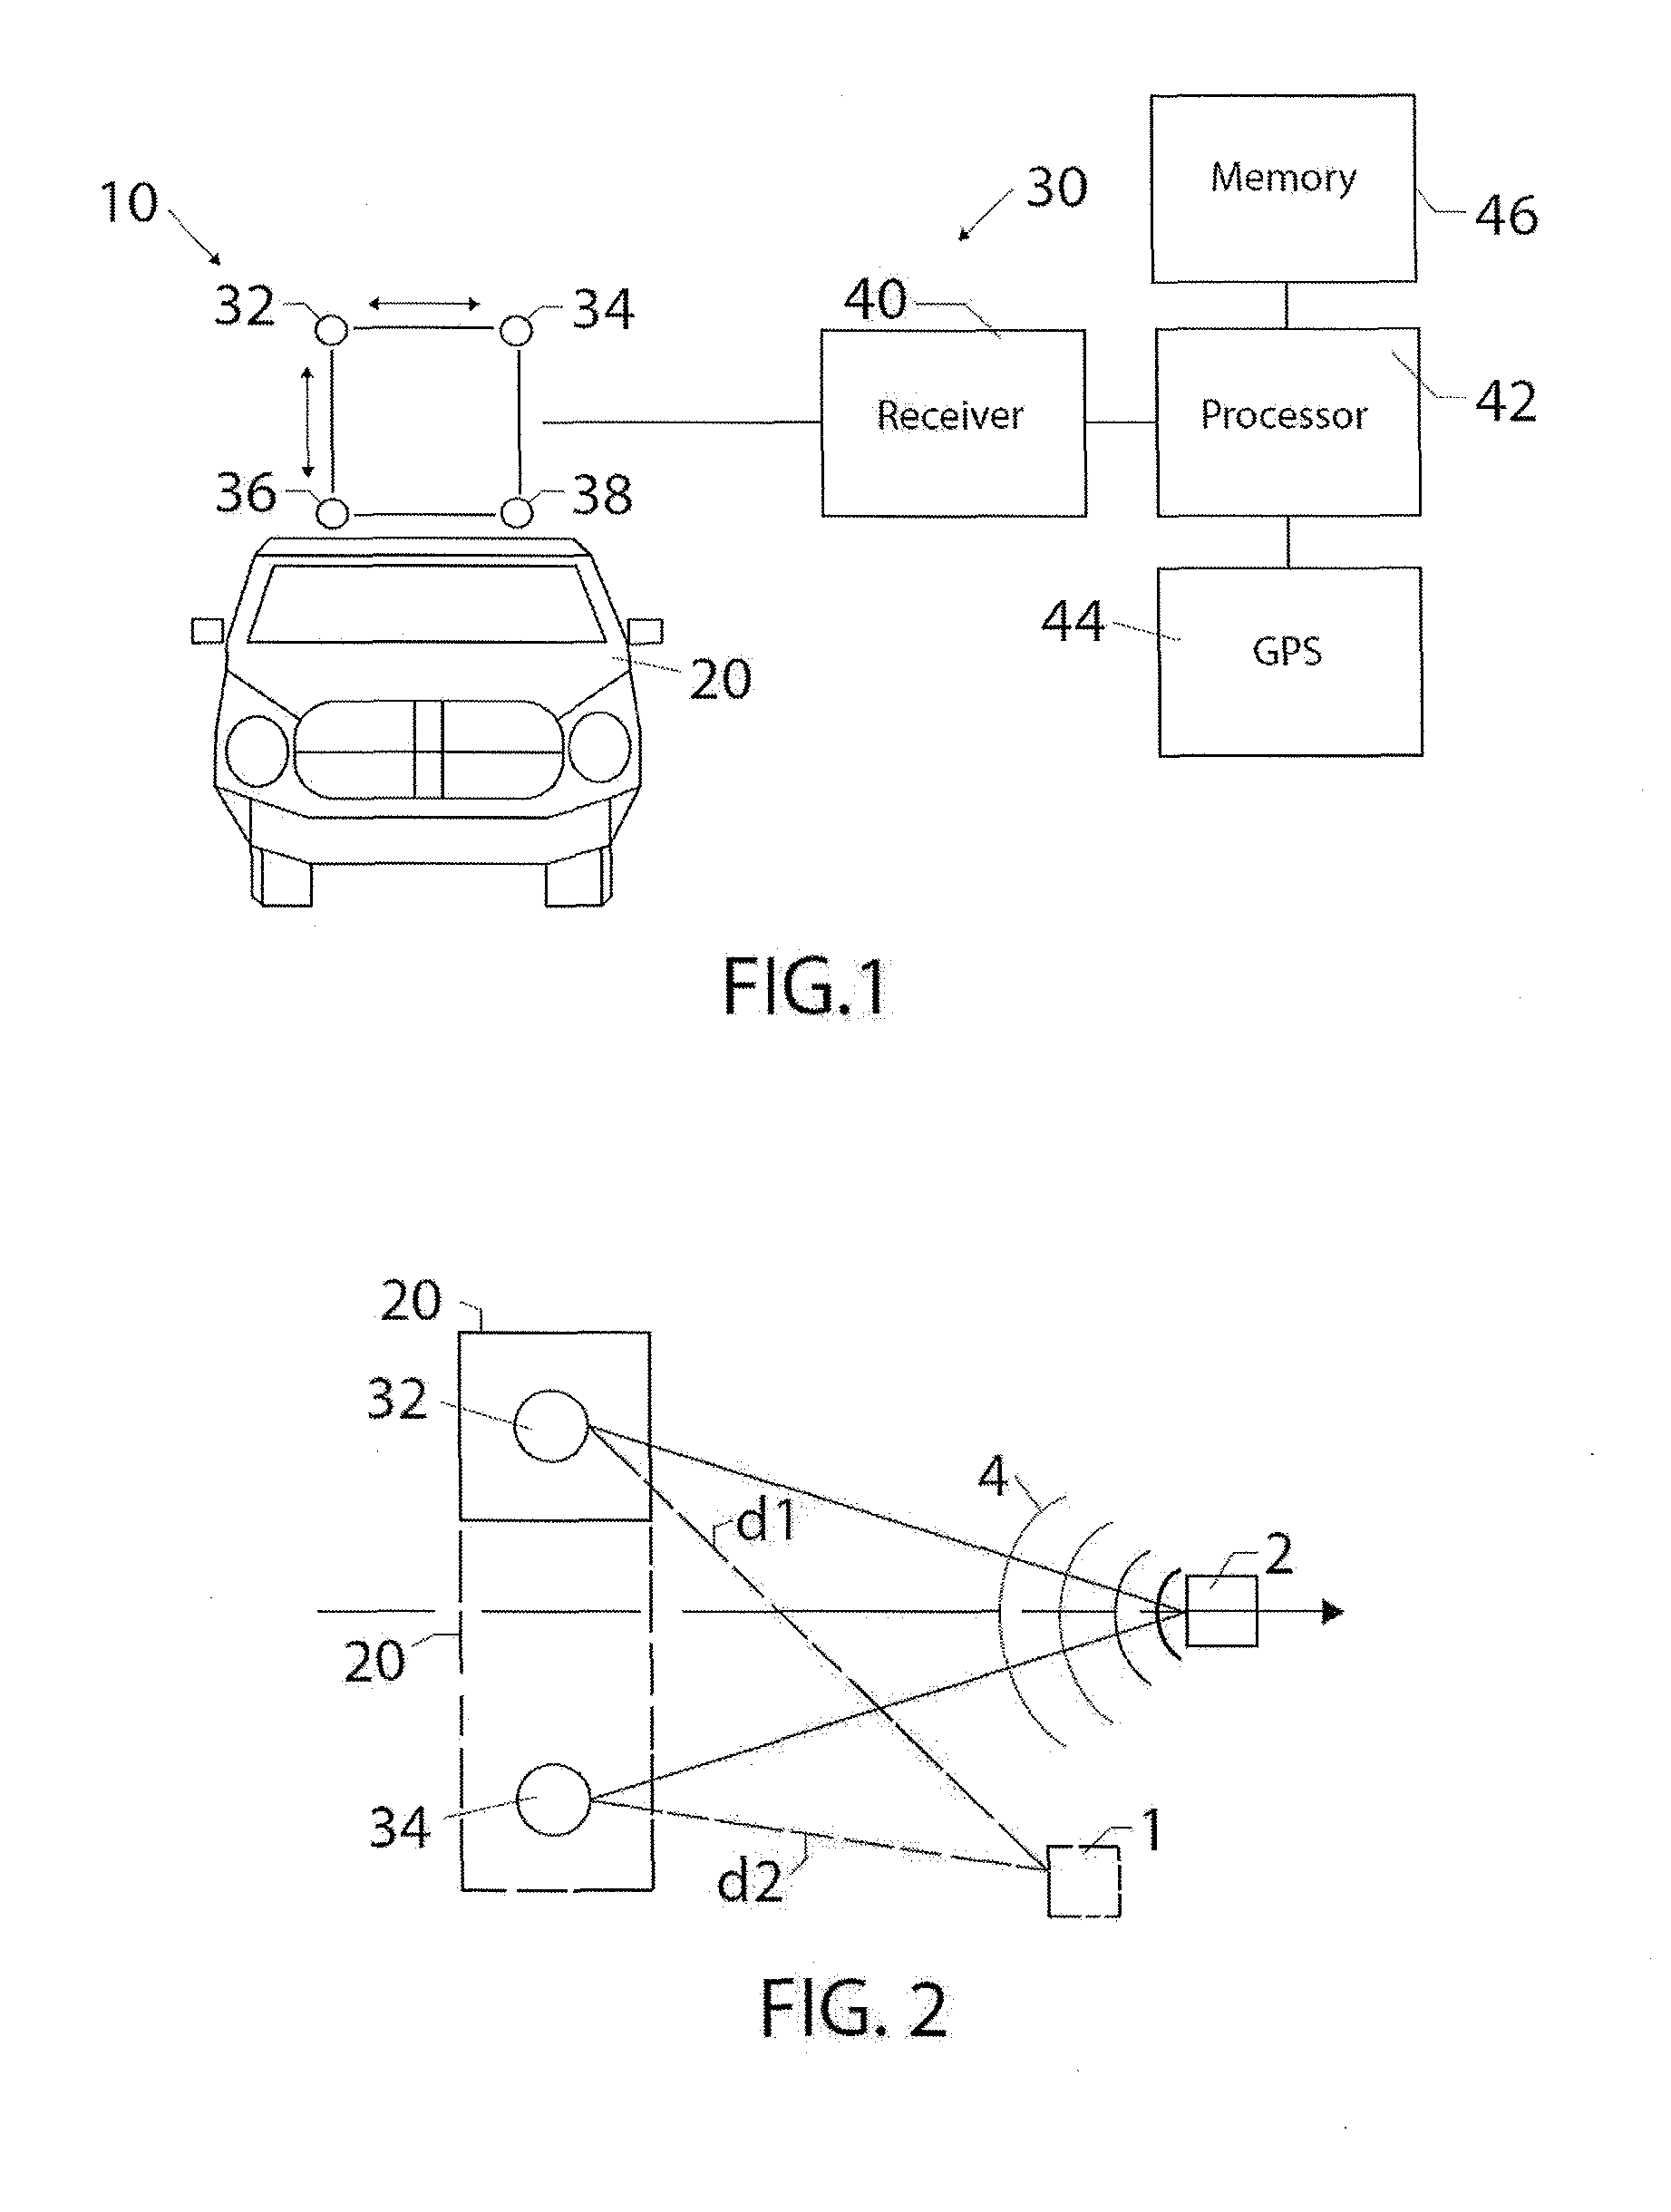 System and method for geo-locating and detecting source of electromagnetic emissions